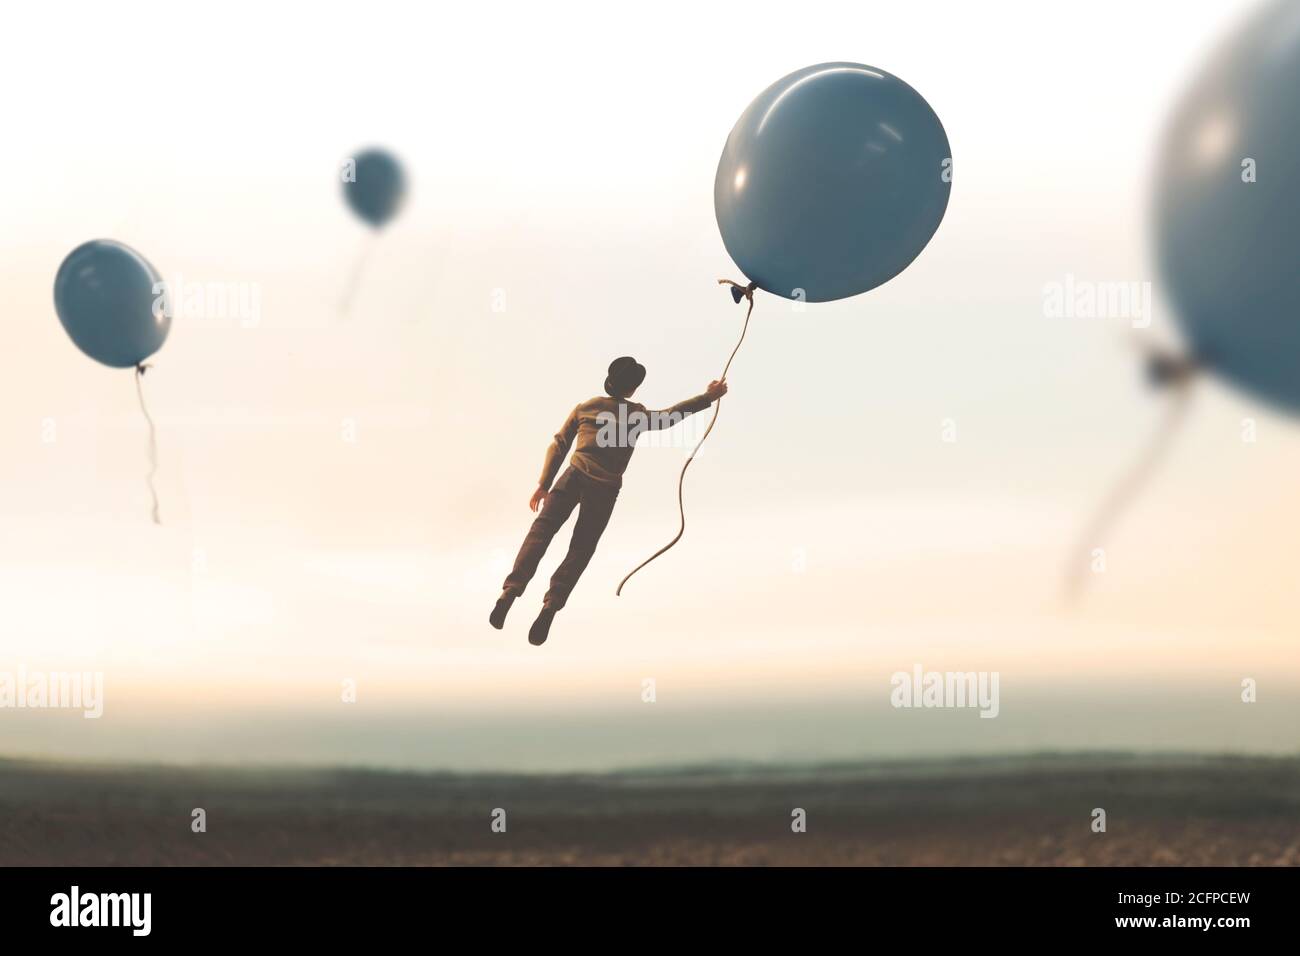 surreal moment, man flying away with a big balloon Stock Photo